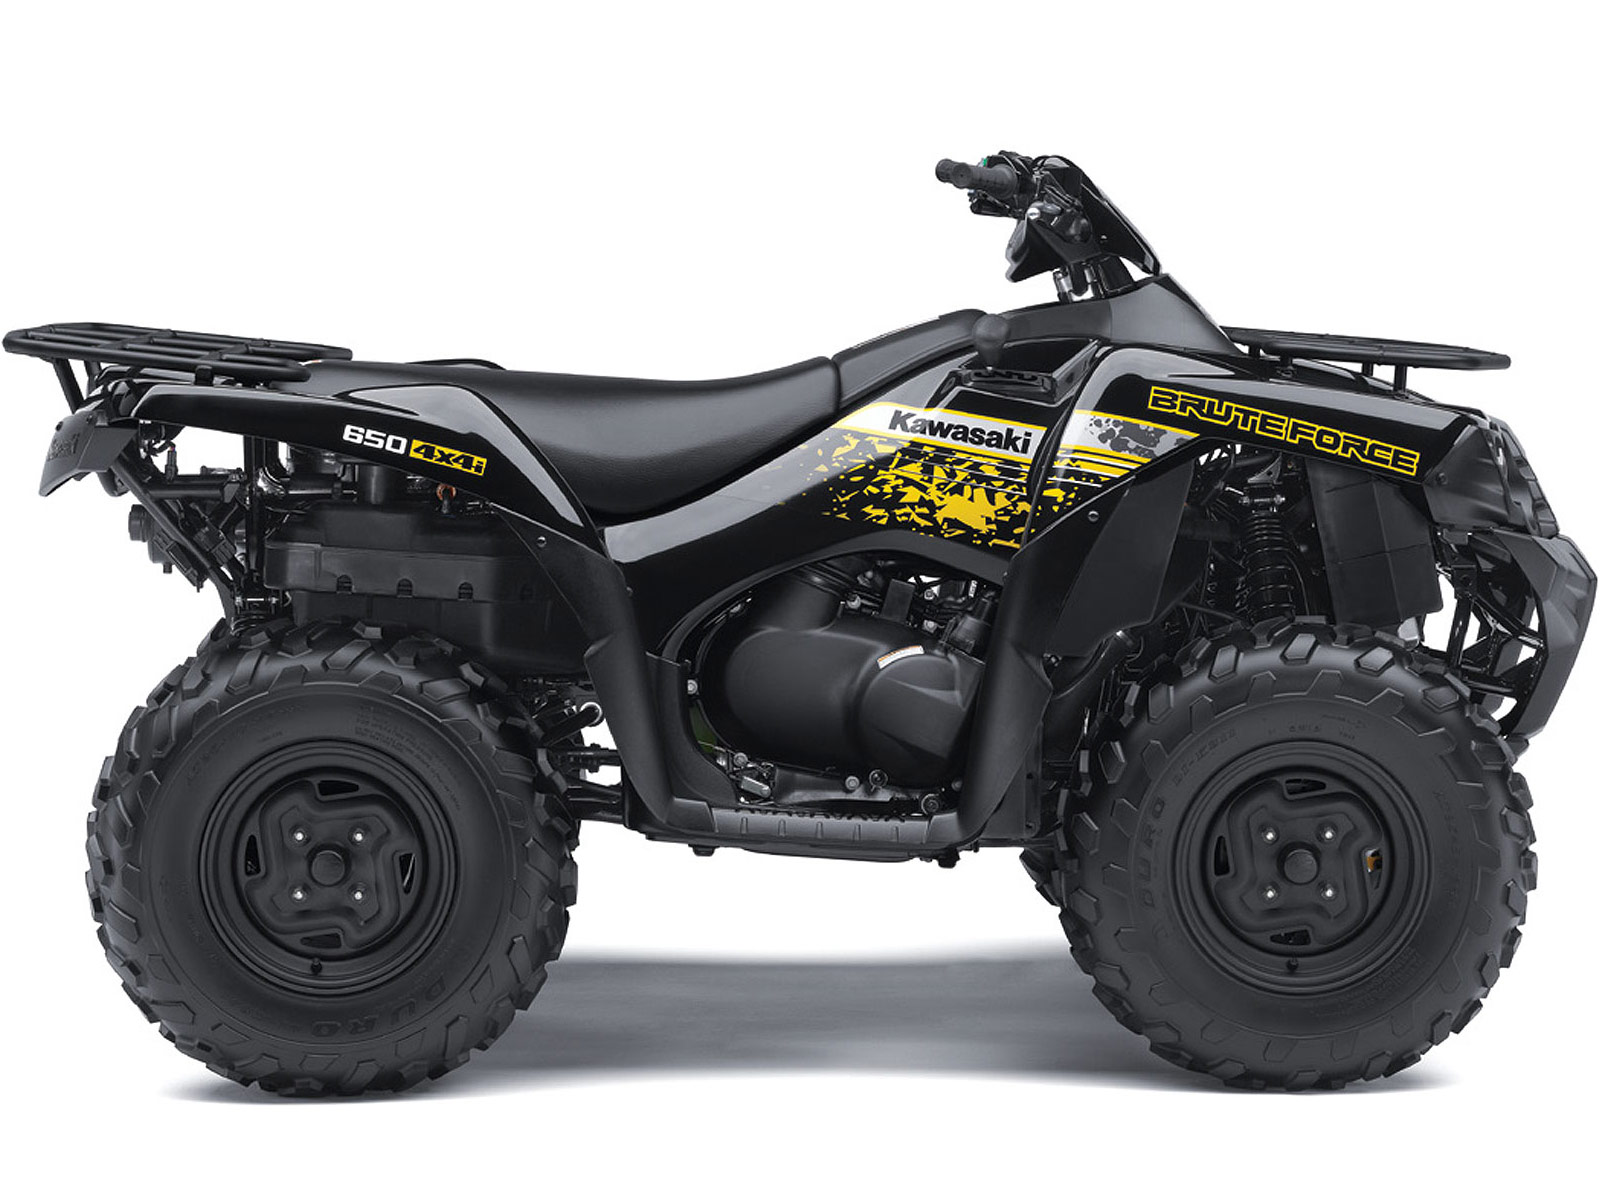 ATV pictures, wallpapers, specs, lawyers: 2013 Brute Force 650 4x4i | Insurance Information